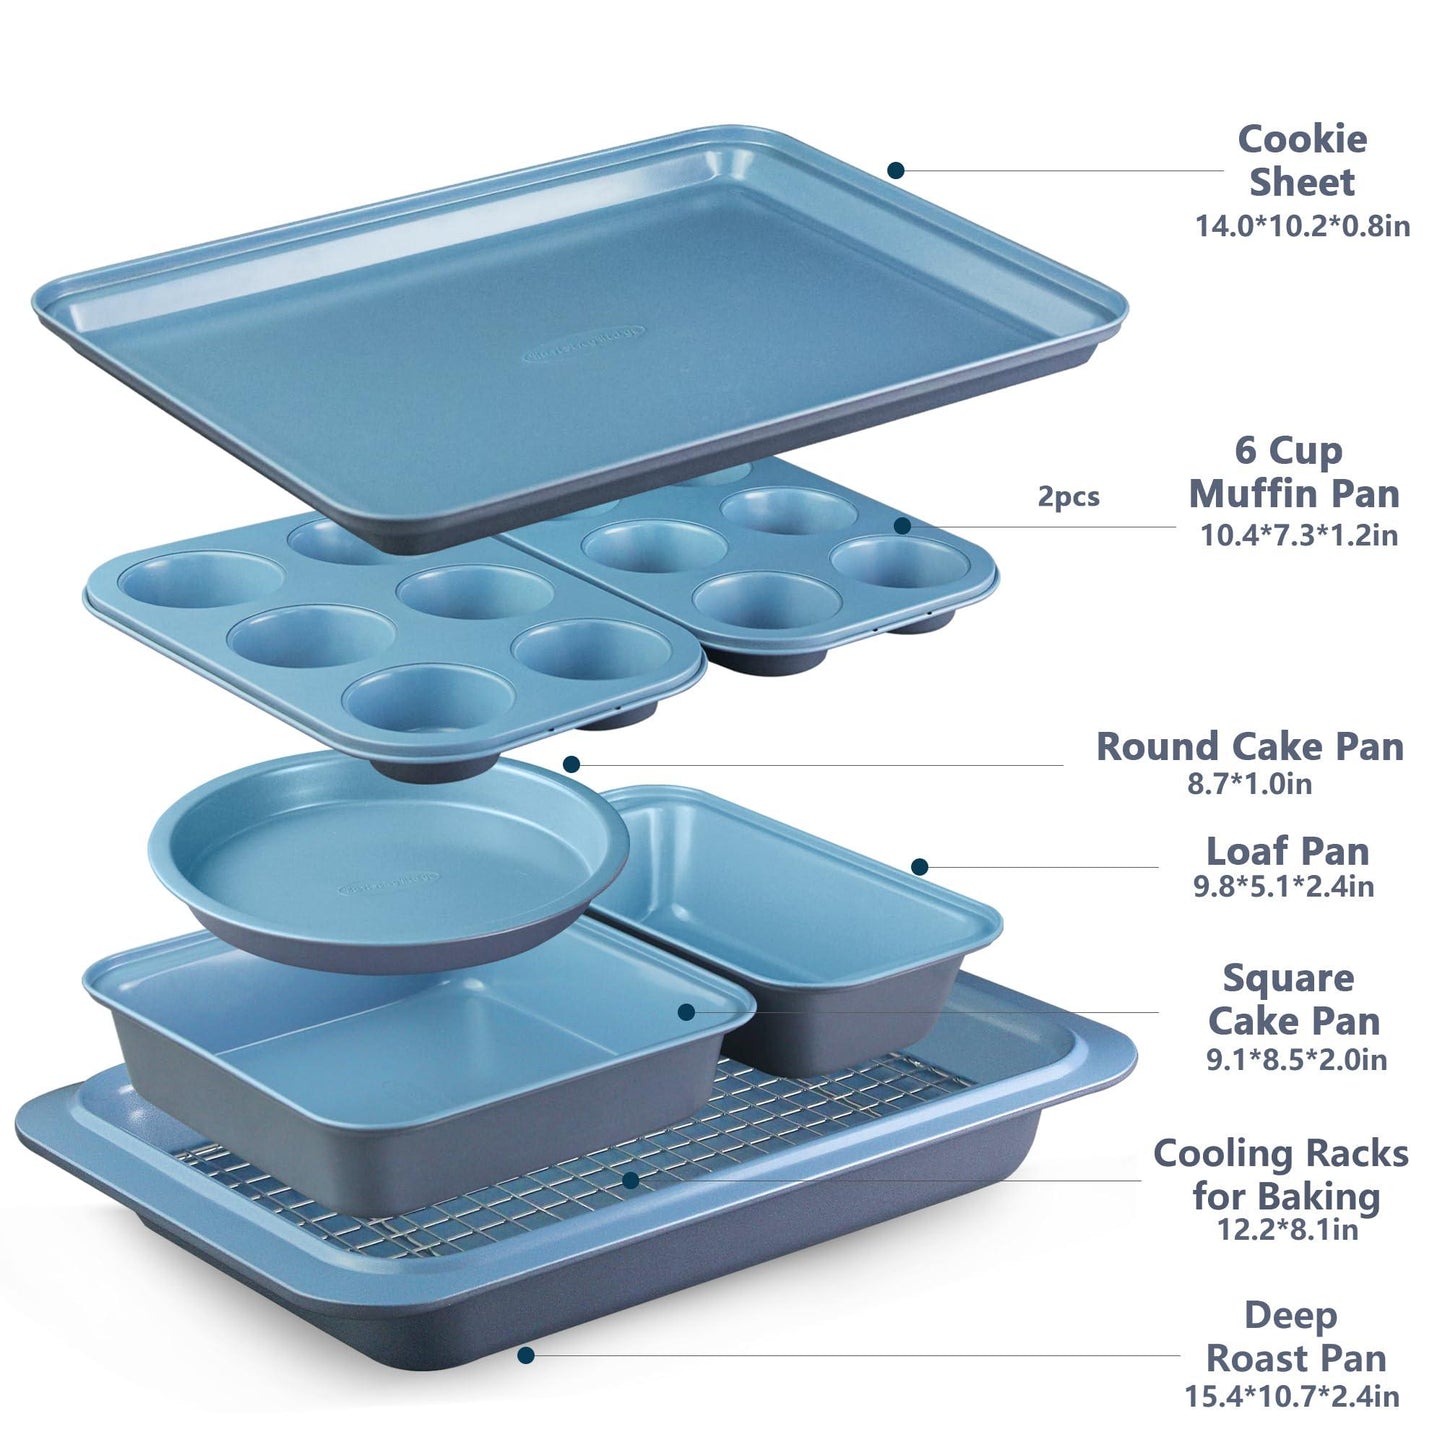 RavisingRidge Baking Pans Set with Nonstick Coating - UltraThick Professional 8-Piece Bi-Color Pans including Cookie Sheet, Muffin, Cake Pans, and Cooling Rack - Heavy Duty, Dishwasher Safe - CookCave